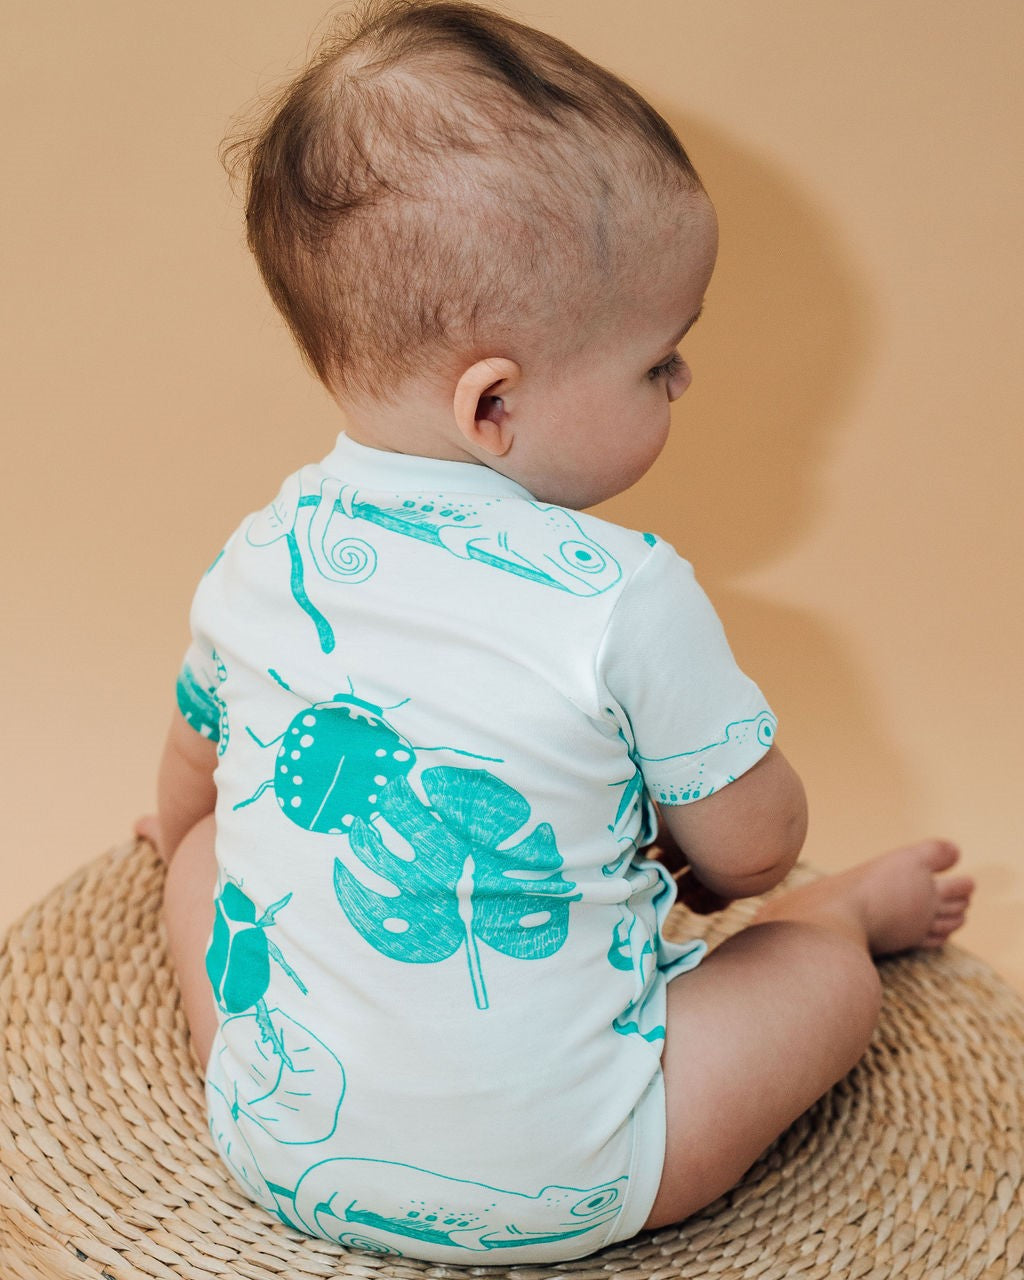  Little Barnacle Onesie 100% organic cotton small batch, Earth friendly and ethically created baby onesies.